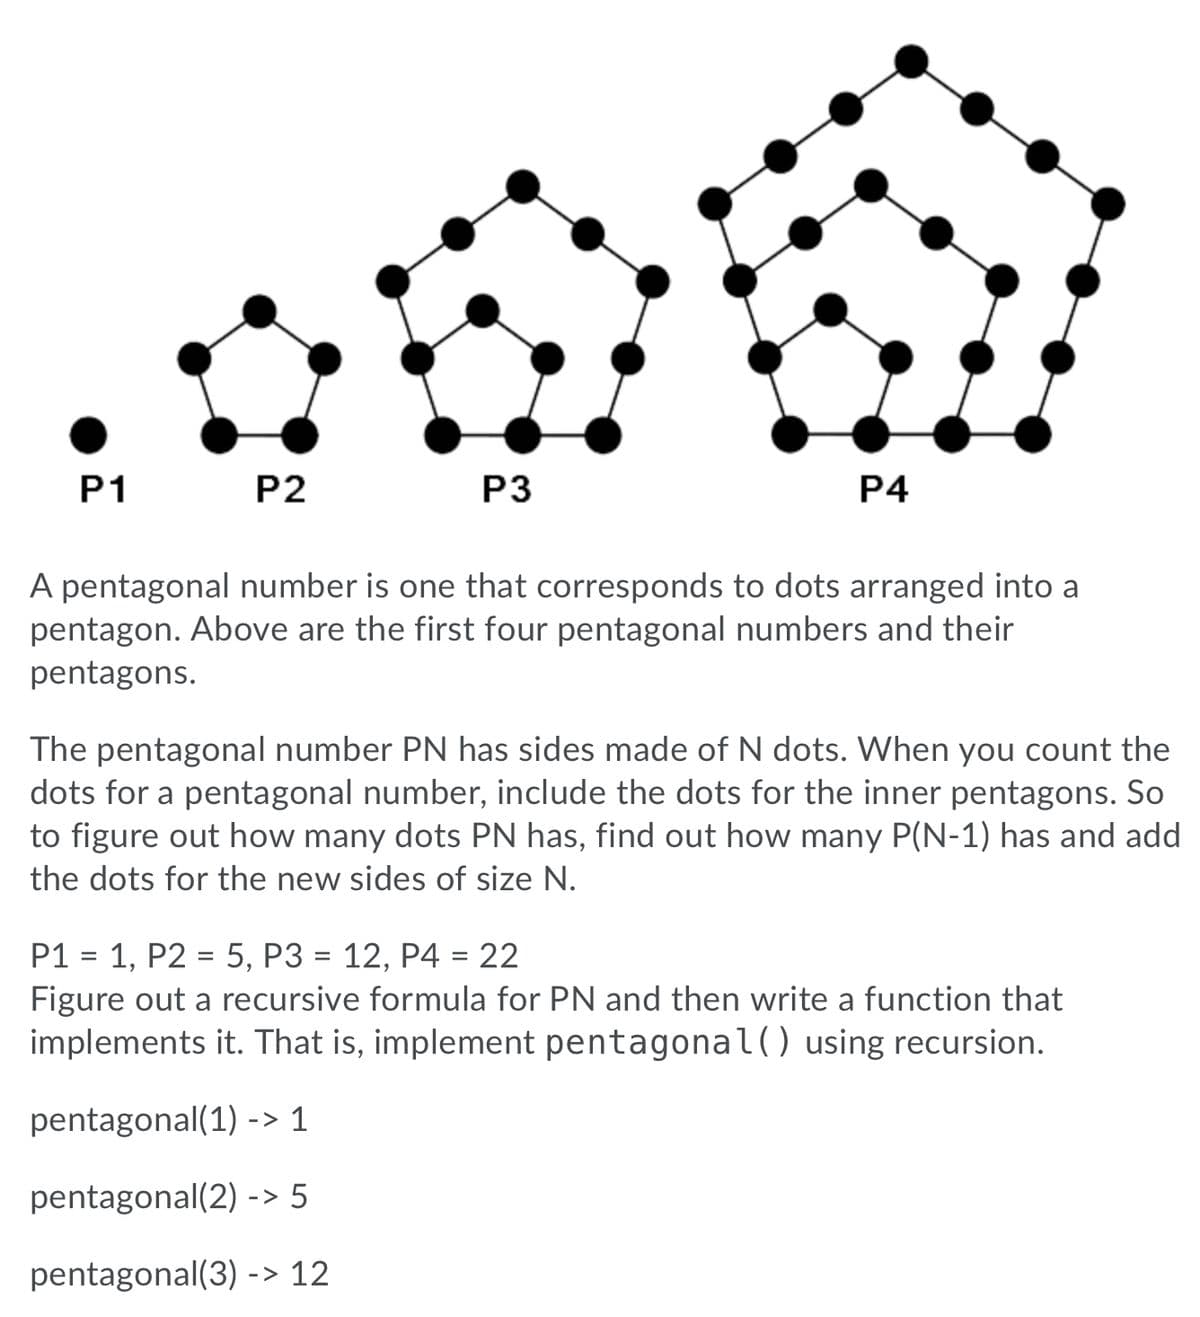 P1
P2
P3
P4
A pentagonal number is one that corresponds to dots arranged into a
pentagon. Above are the first four pentagonal numbers and their
pentagons.
The pentagonal number PN has sides made of N dots. When you count the
dots for a pentagonal number, include the dots for the inner pentagons. So
to figure out how many dots PN has, find out how many P(N-1) has and add
the dots for the new sides of size N.
P1 = 1, P2 = 5, P3 = 12, P4 = 22
Figure out a recursive formula for PN and then write a function that
implements it. That is, implement pentagonal() using recursion.
pentagonal(1) -> 1
pentagonal(2) -> 5
pentagonal(3) -> 12
